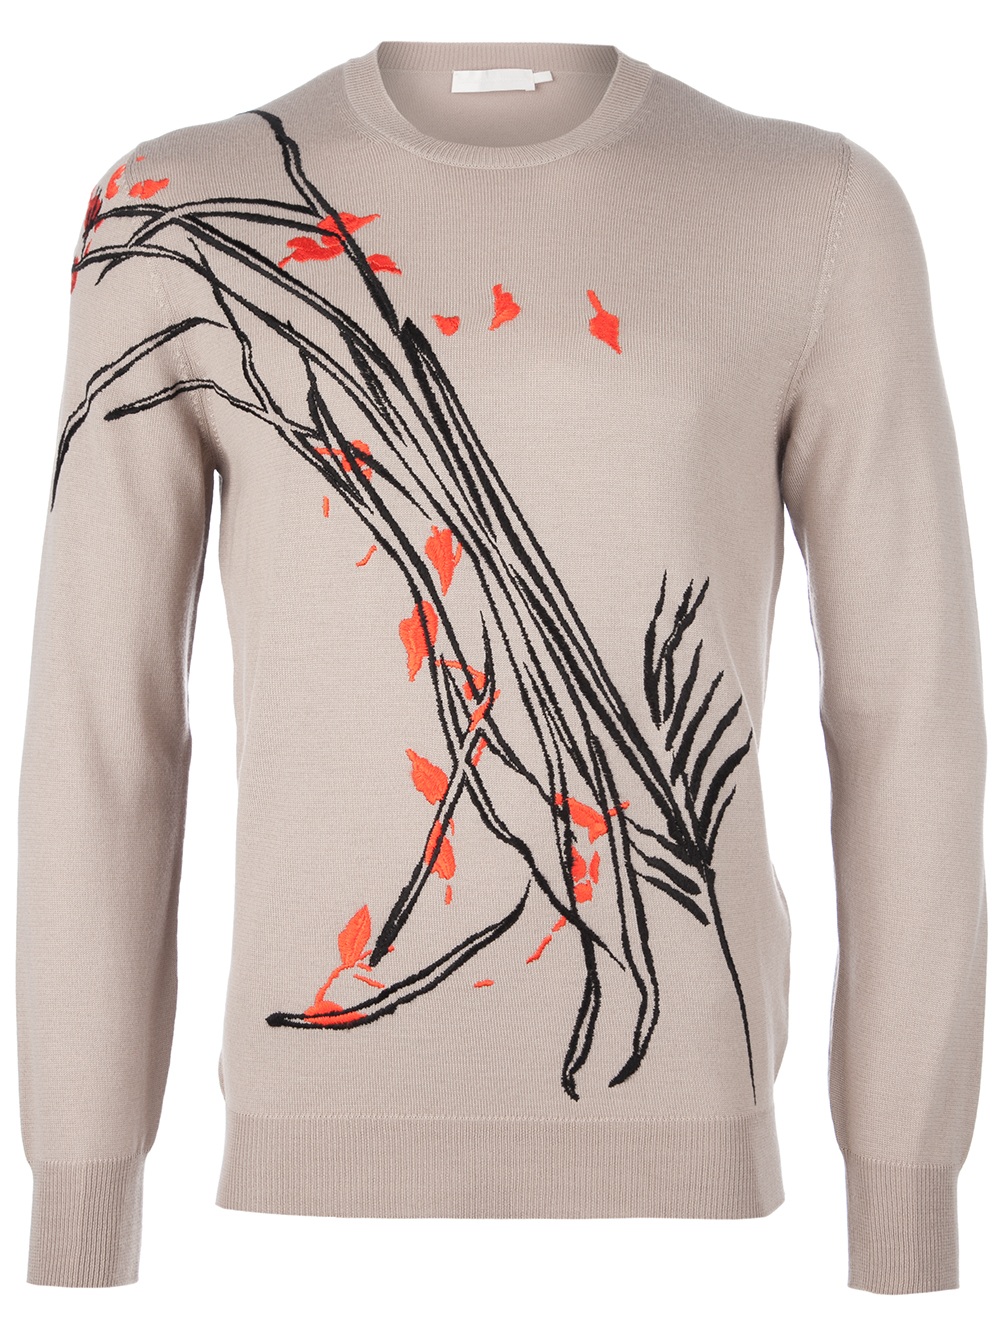 Lyst - Alexander mcqueen Patterned Crew Neck Sweater in Natural for Men